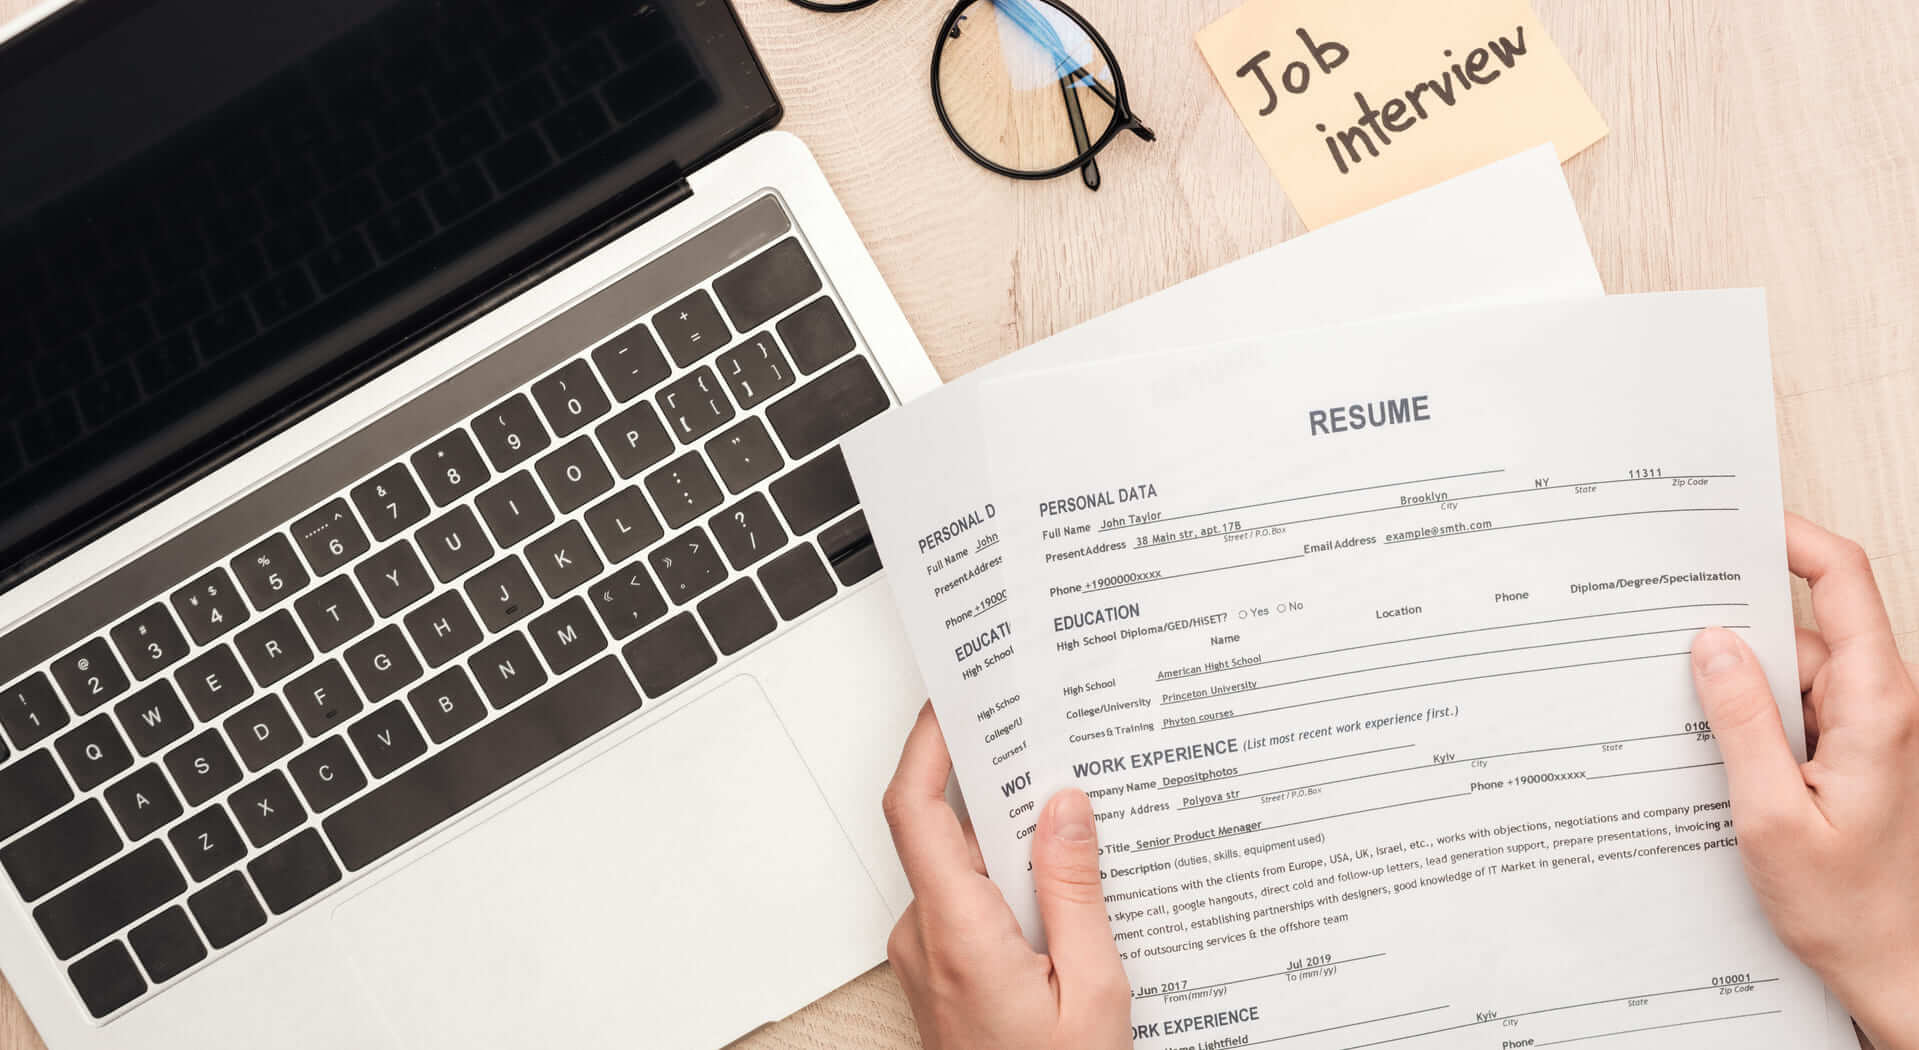 cropped-view-of-recruiter-holding-resume-templates-2022-03-22-16-53-15-utc (1) (2) (1)